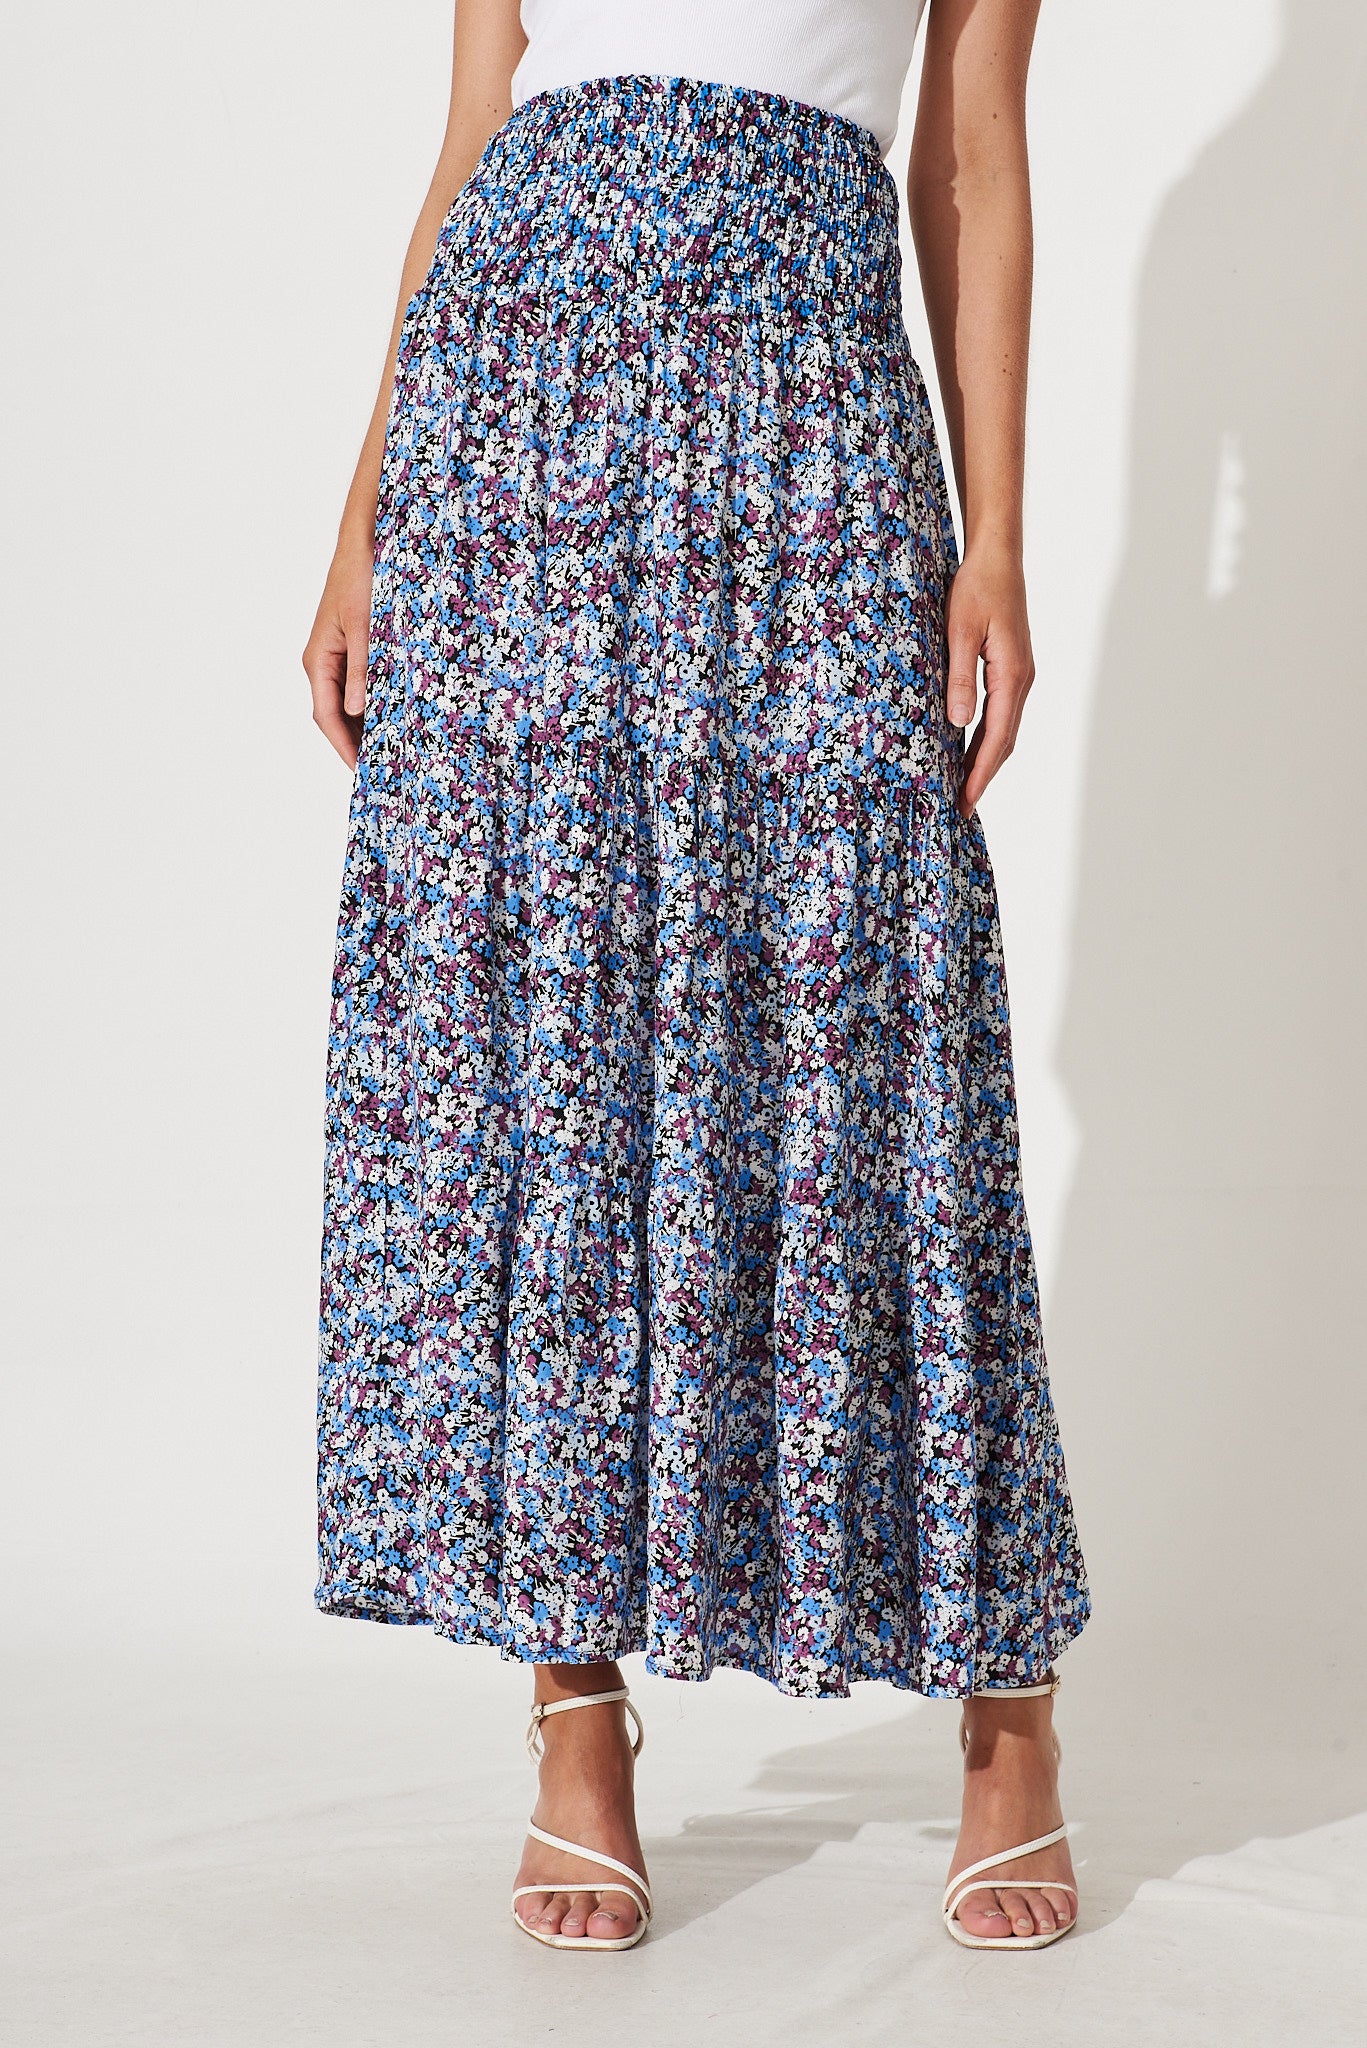 Macarena Maxi Skirt In Blue With Multi Floral – St Frock